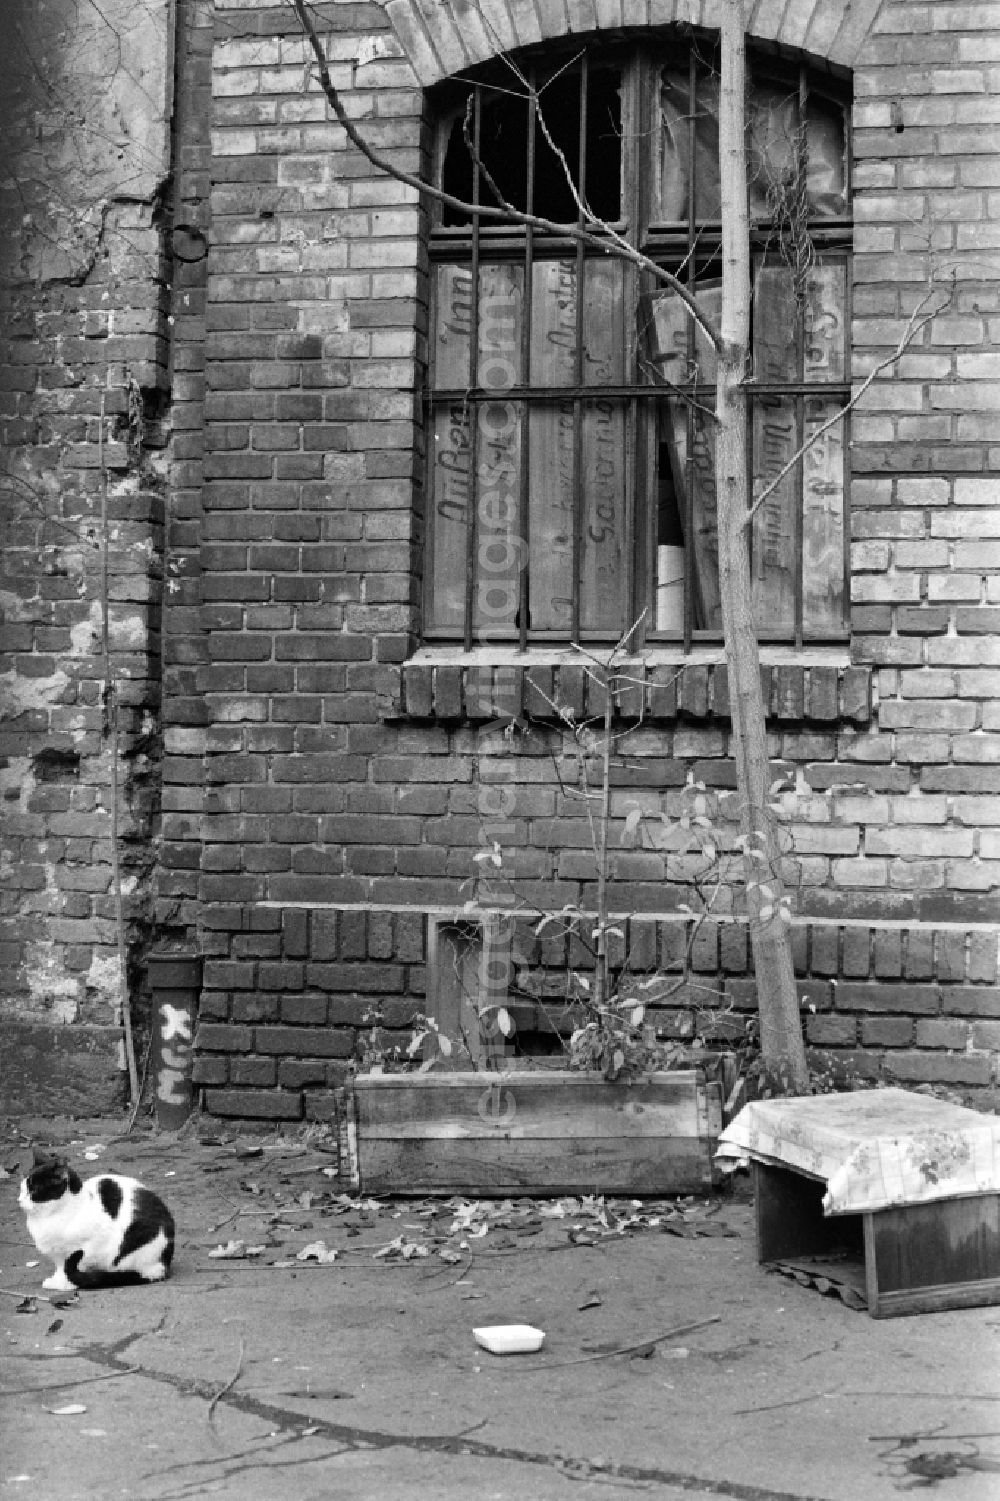 GDR image archive: Berlin - View of the backyard of a ruinous old building in Berlin - Mitte, the former capital of the GDR, German Democratic Republic